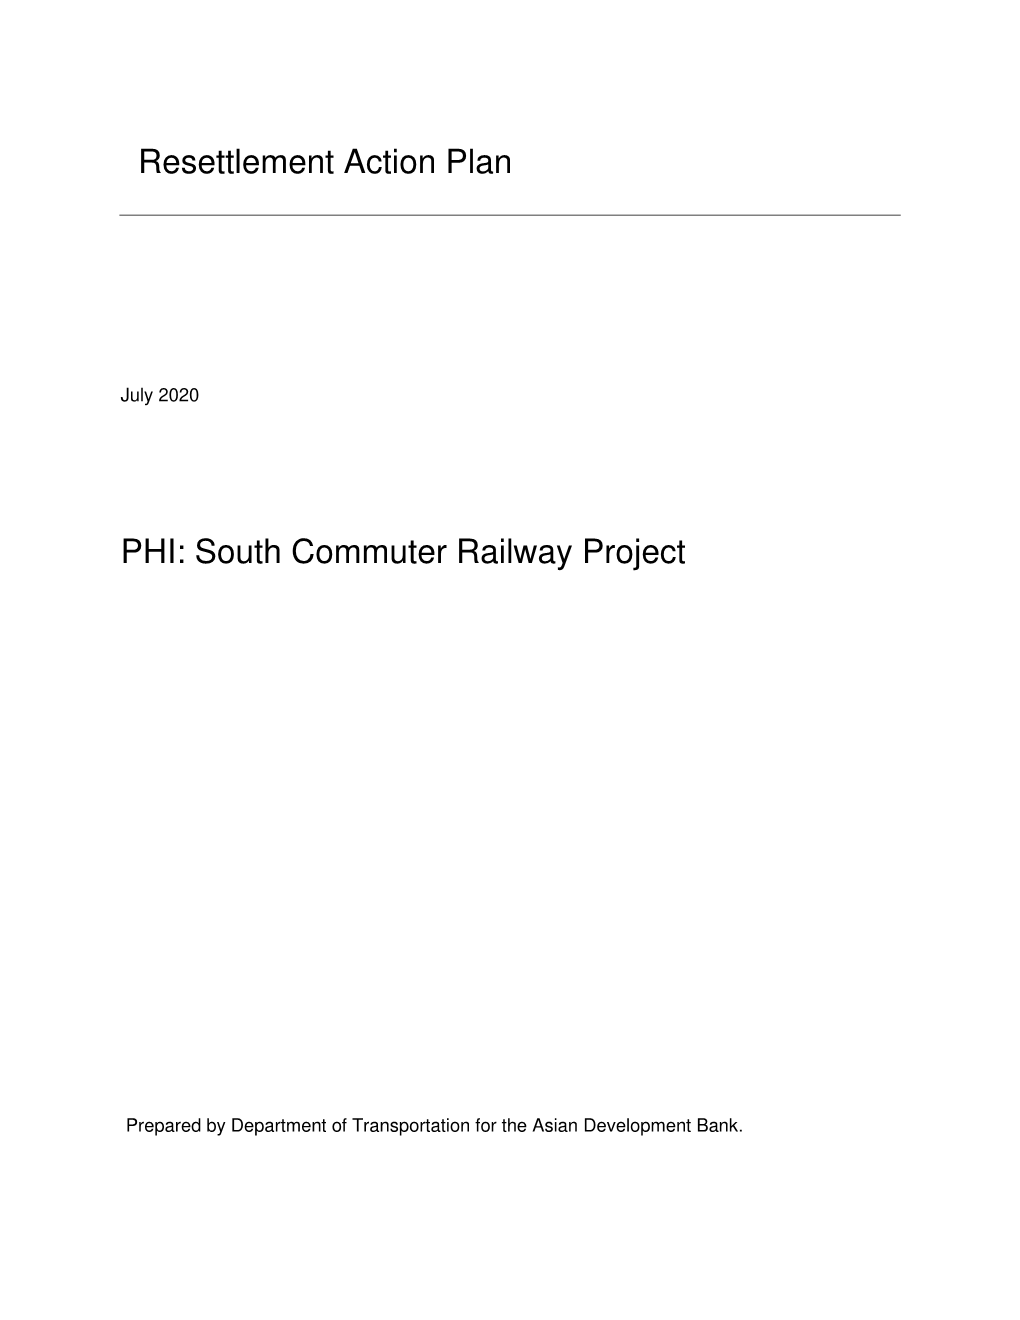 52220-001: South Commuter Railway Project